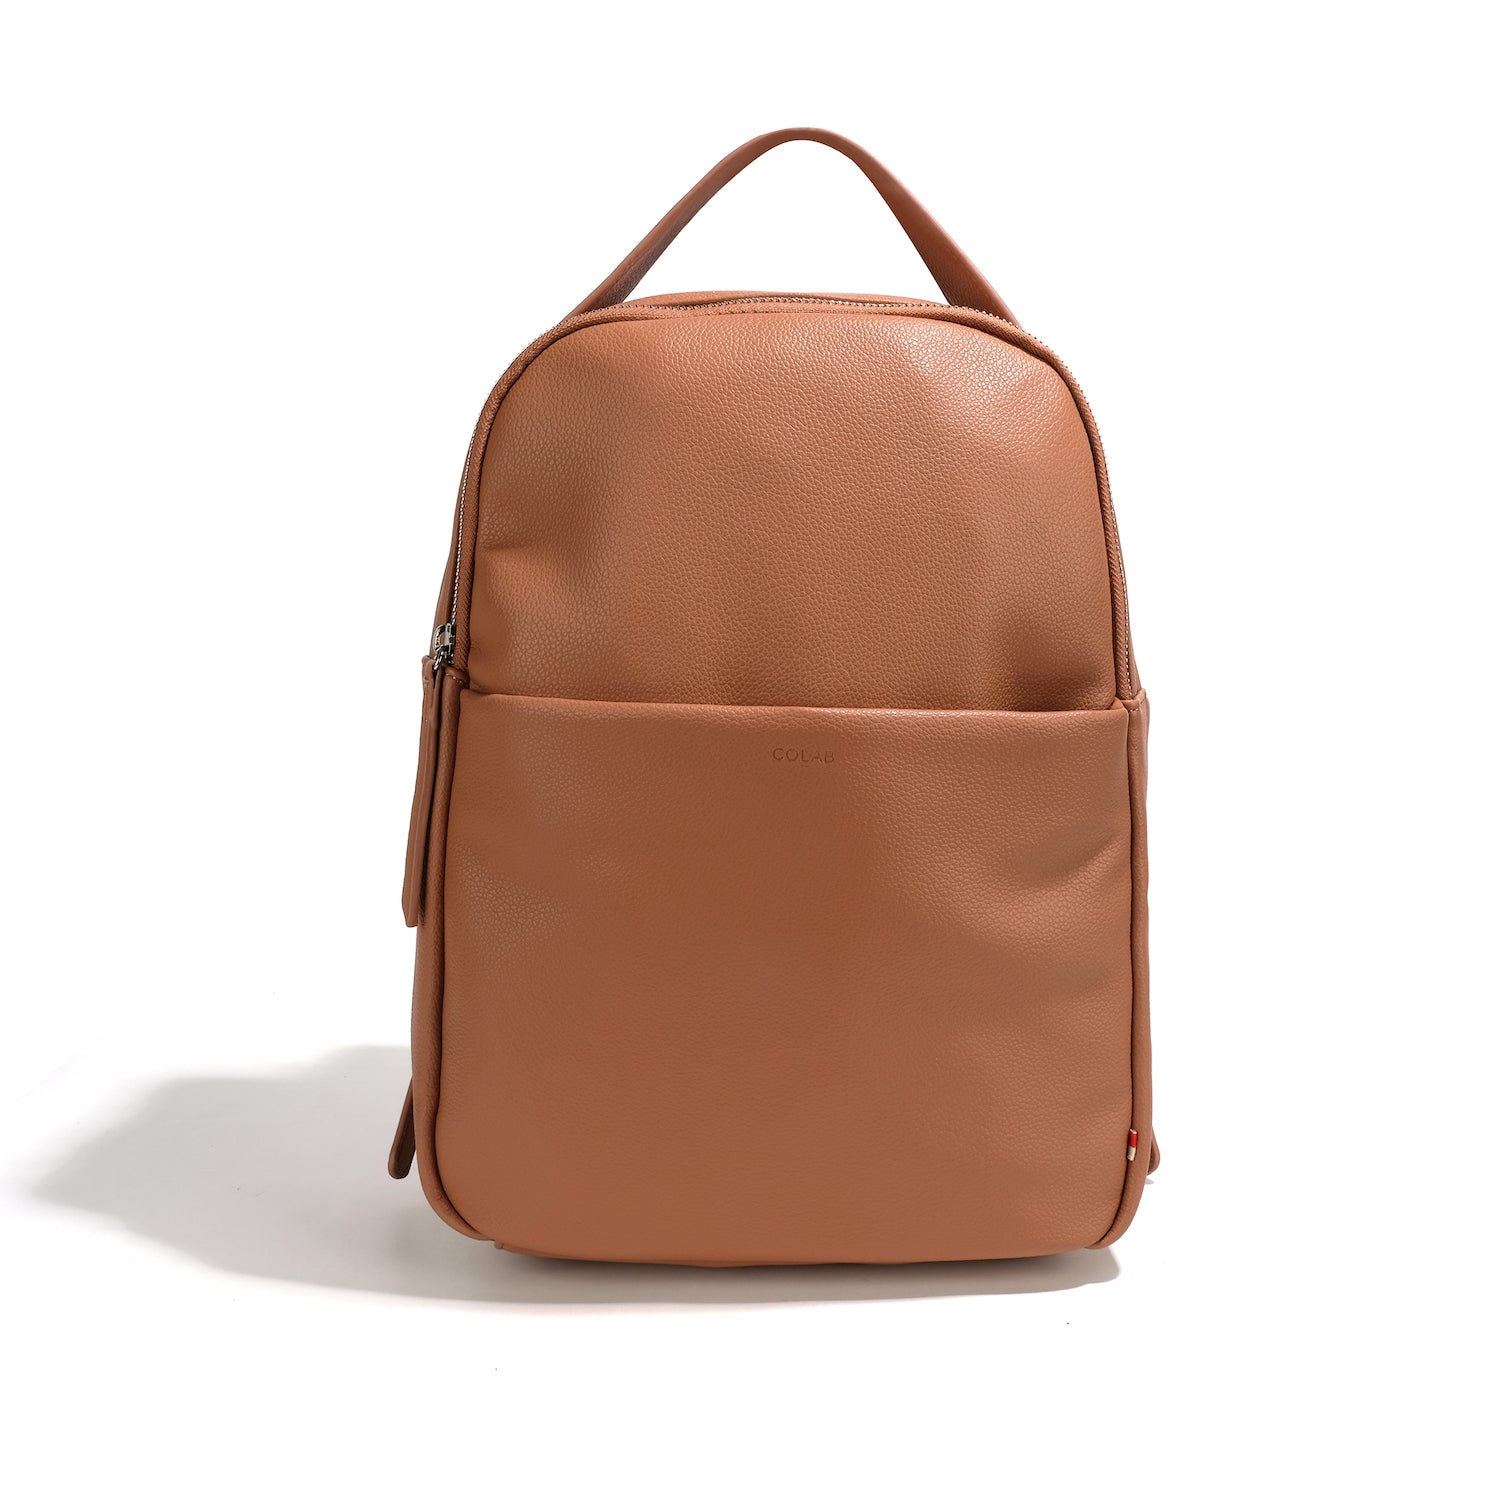 co-lab Tina Backpack - Toffee Accessories - Other Accessories - Handbags & Wallets by co-lab | Grace the Boutique